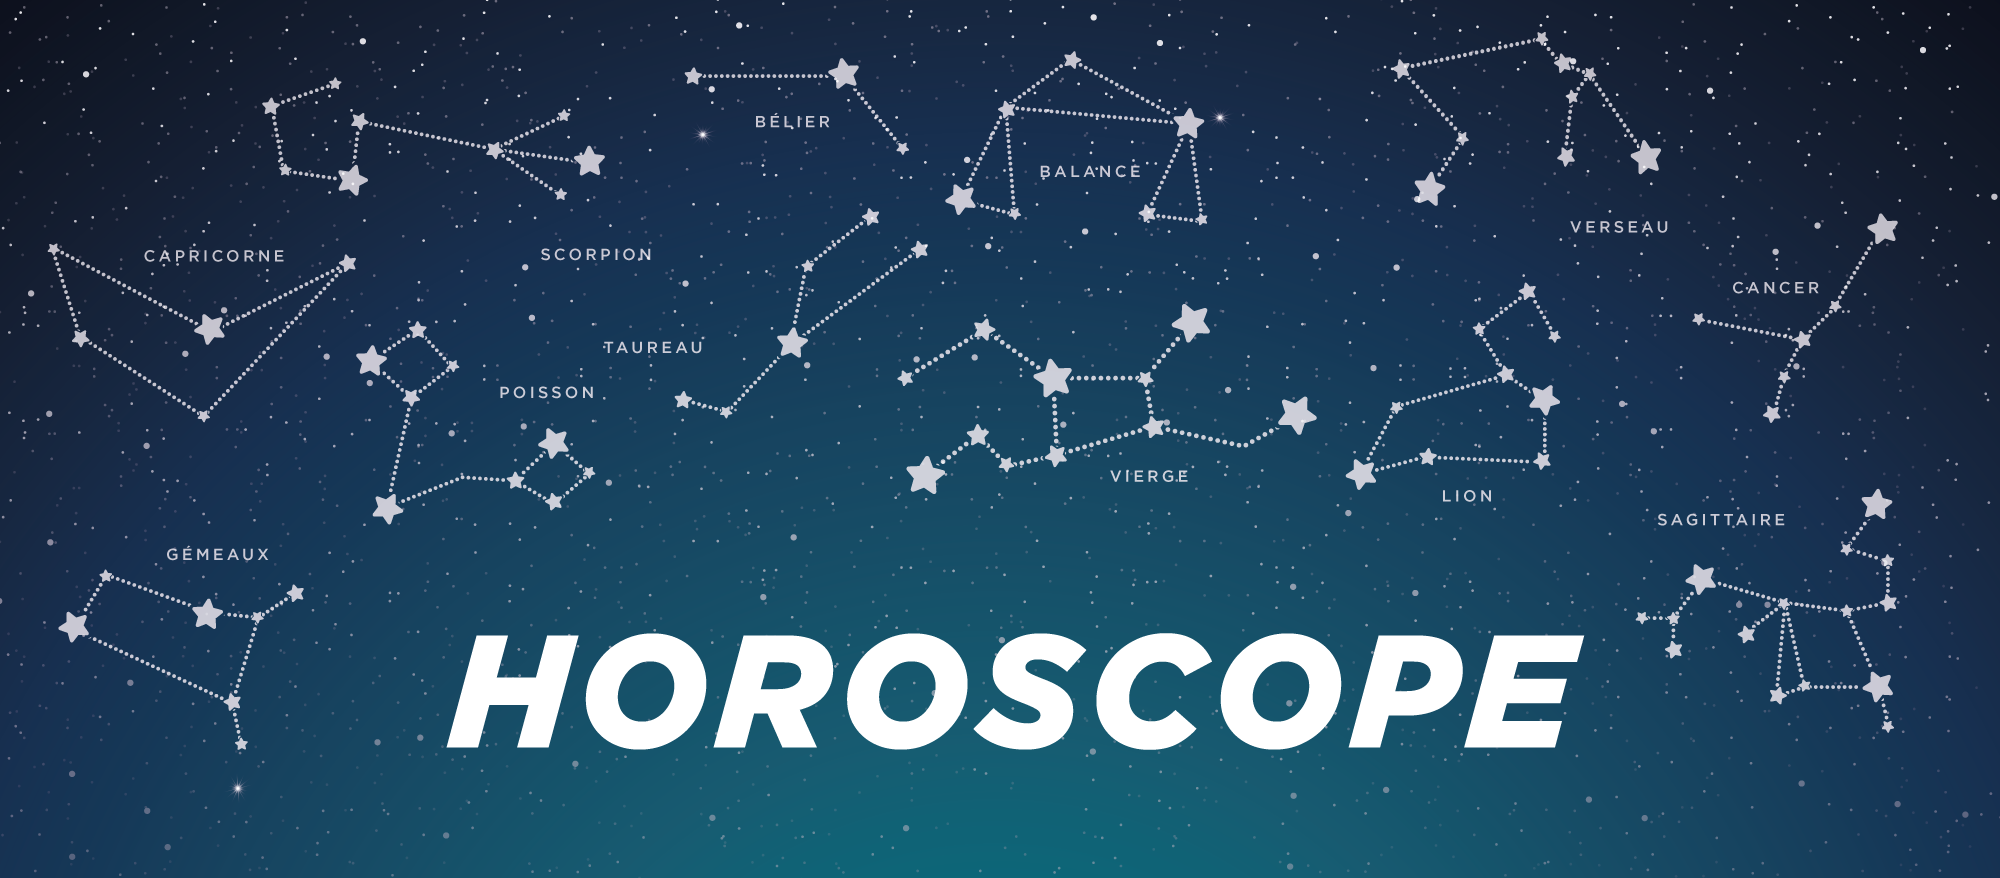 banniere-horoscope-2.png (436 KB)